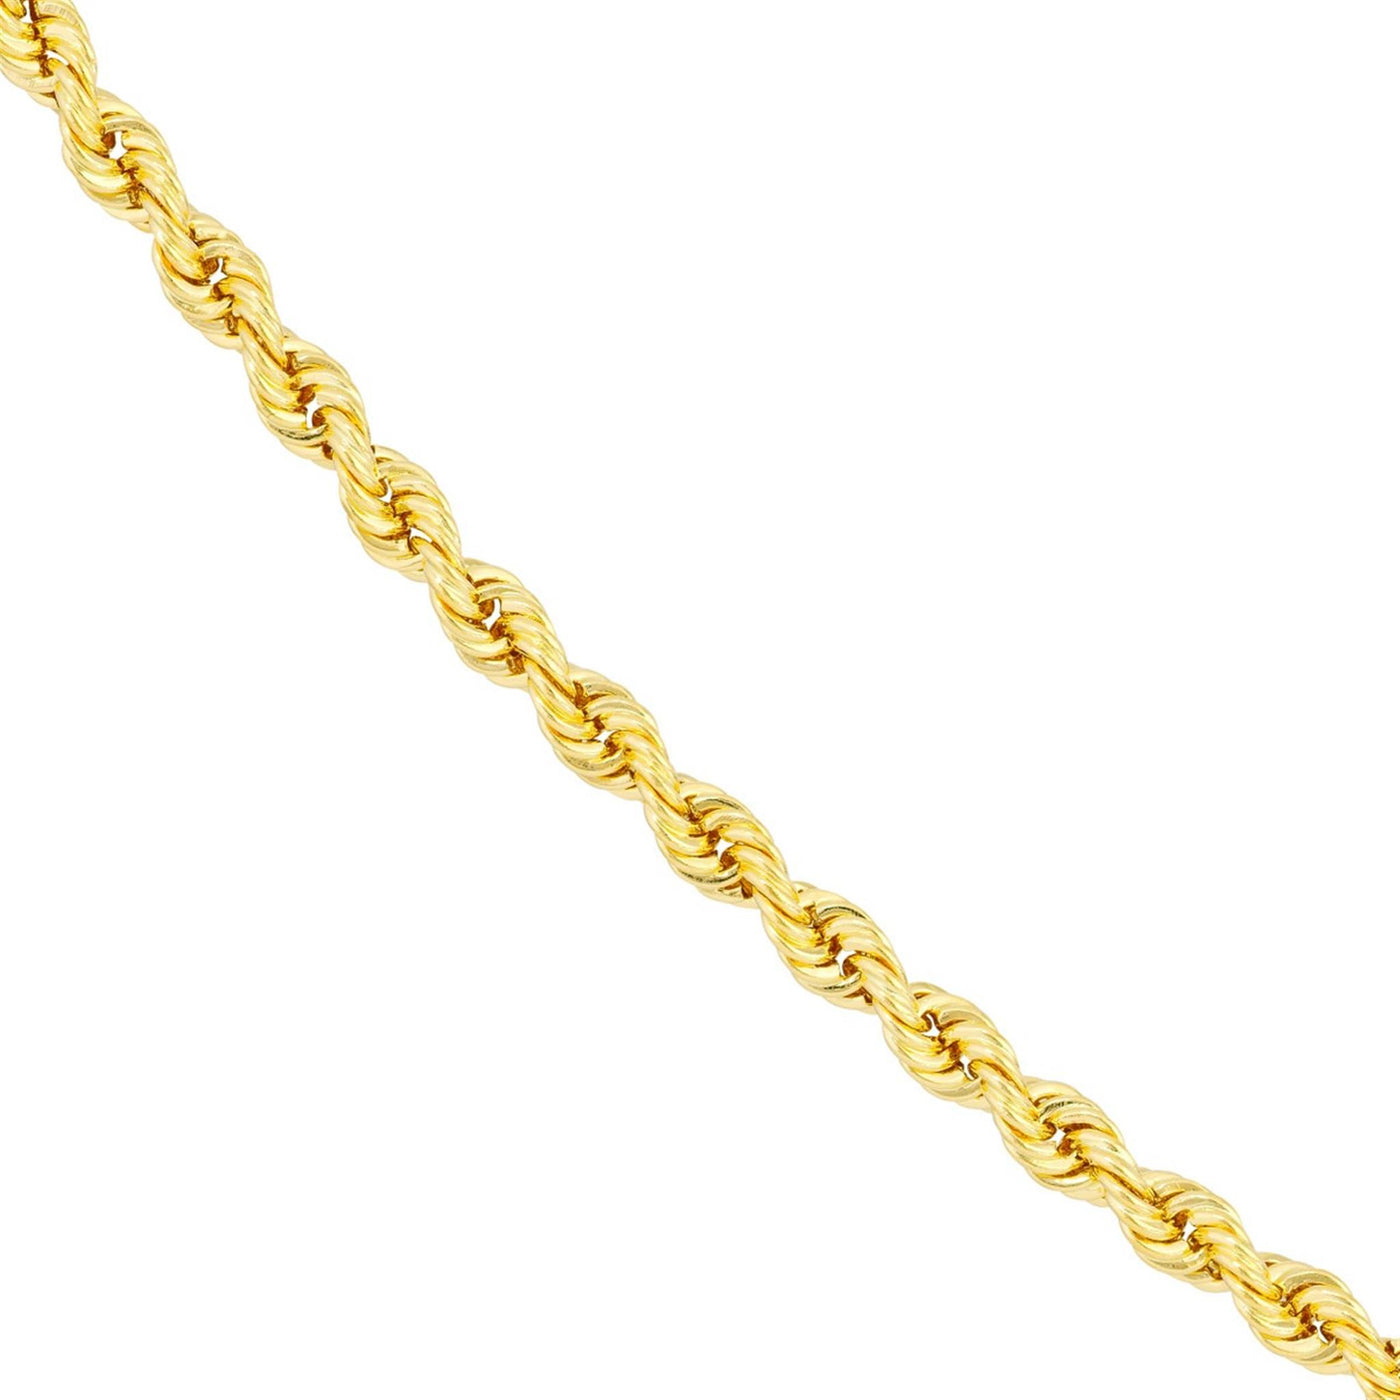 10K Yellow Gold 3mm 22" Adjustable Rope Chain